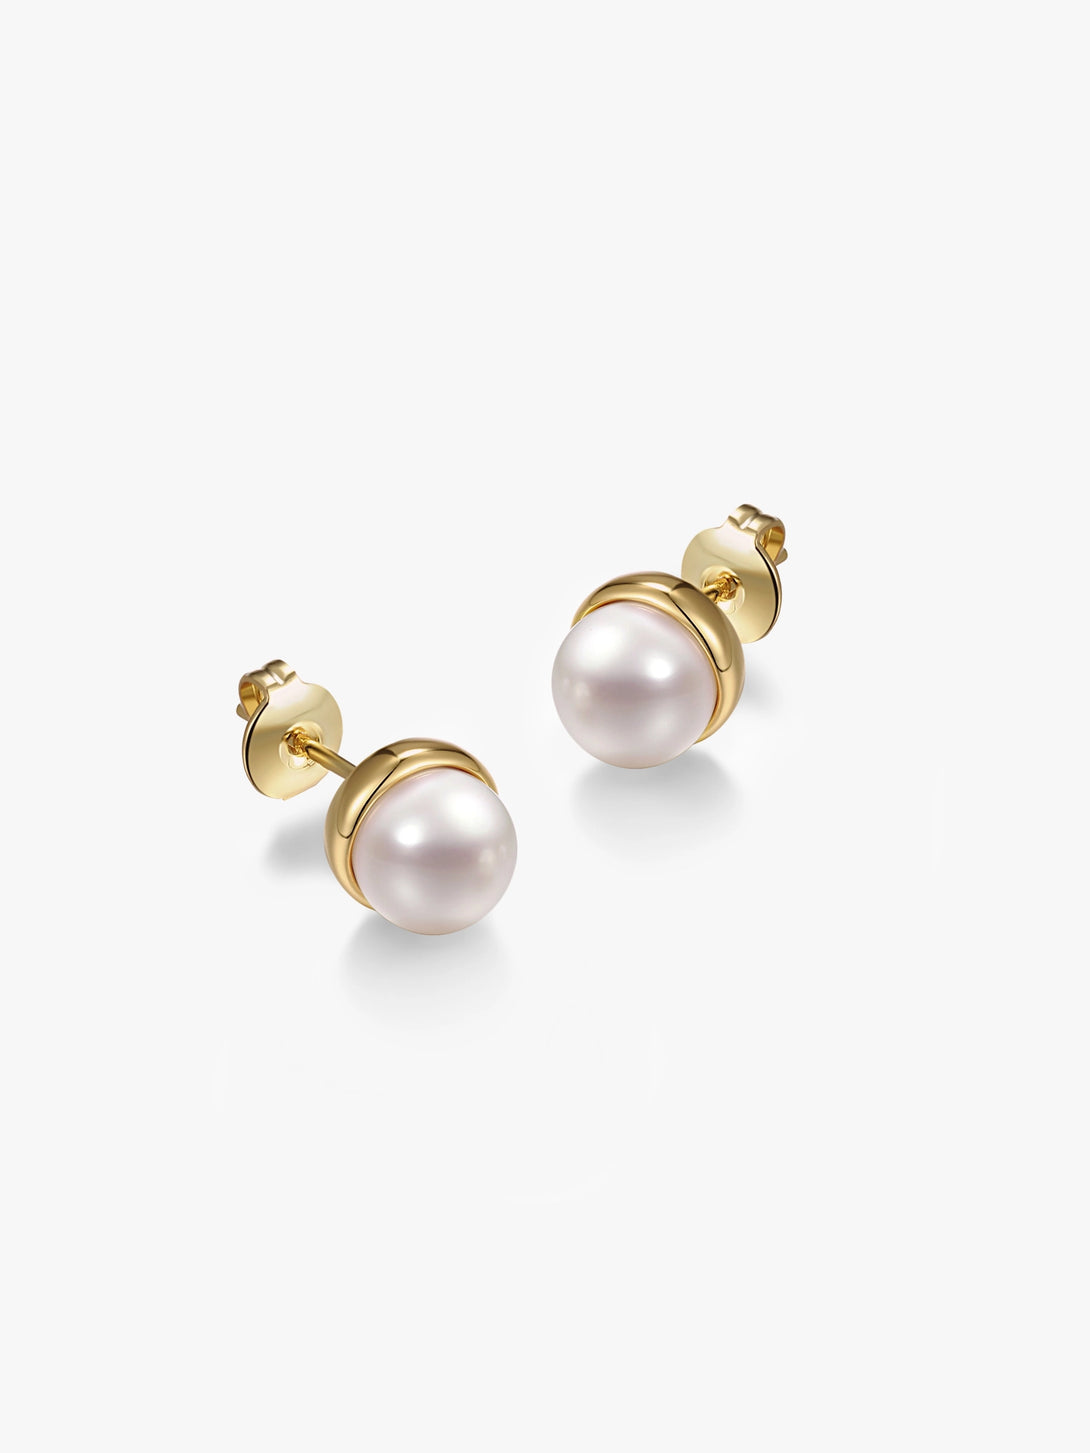 Pearl Daily Round Stud Earrings - OOTDY